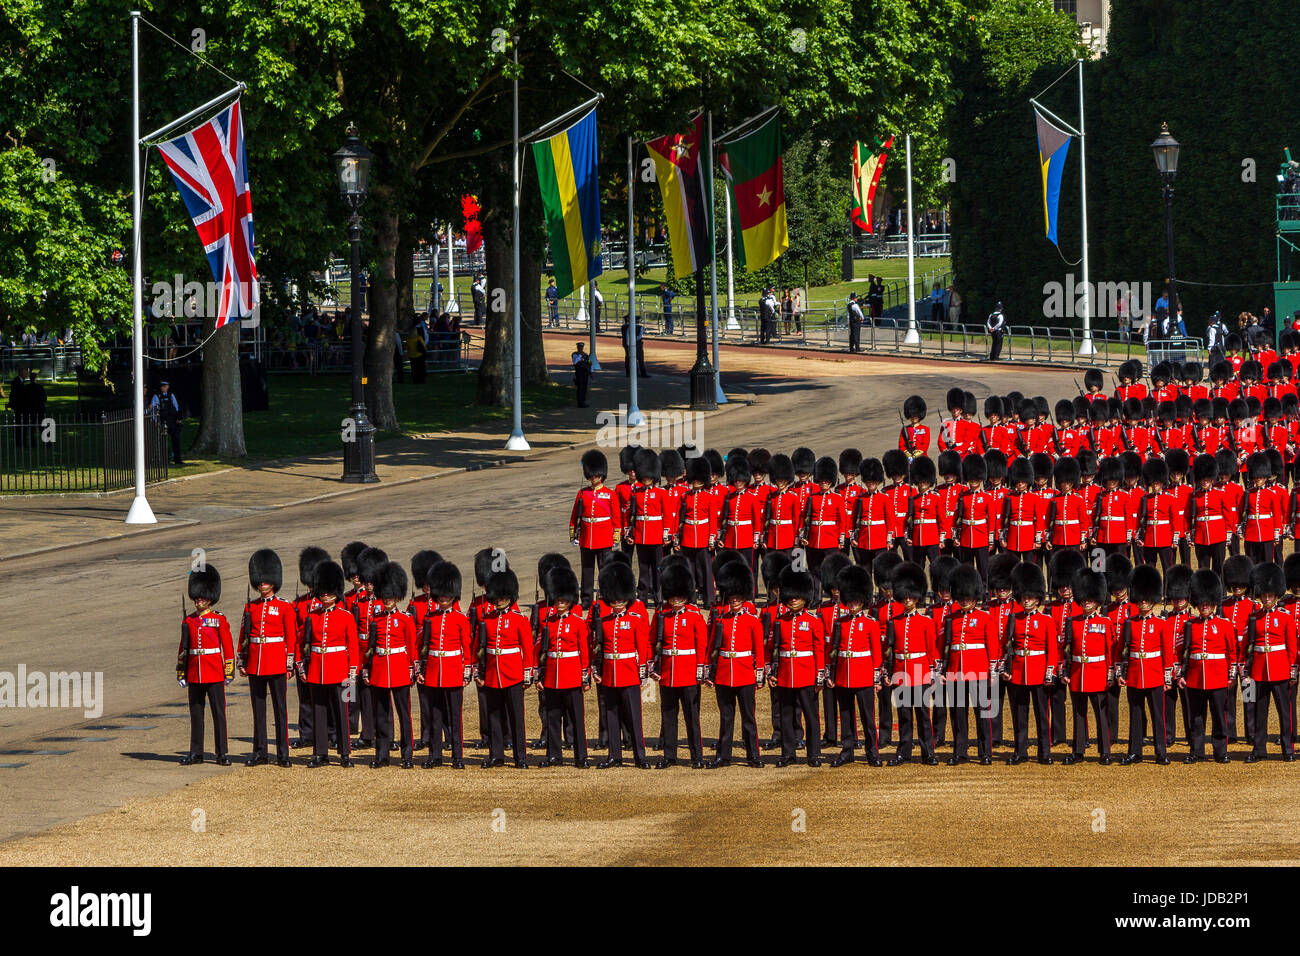 Soldiers of The Irish Guards on parade  at Trooping The Colour or The Queens Birthday Parade at Horse Guards Parade, London, UK, 2017 Stock Photo